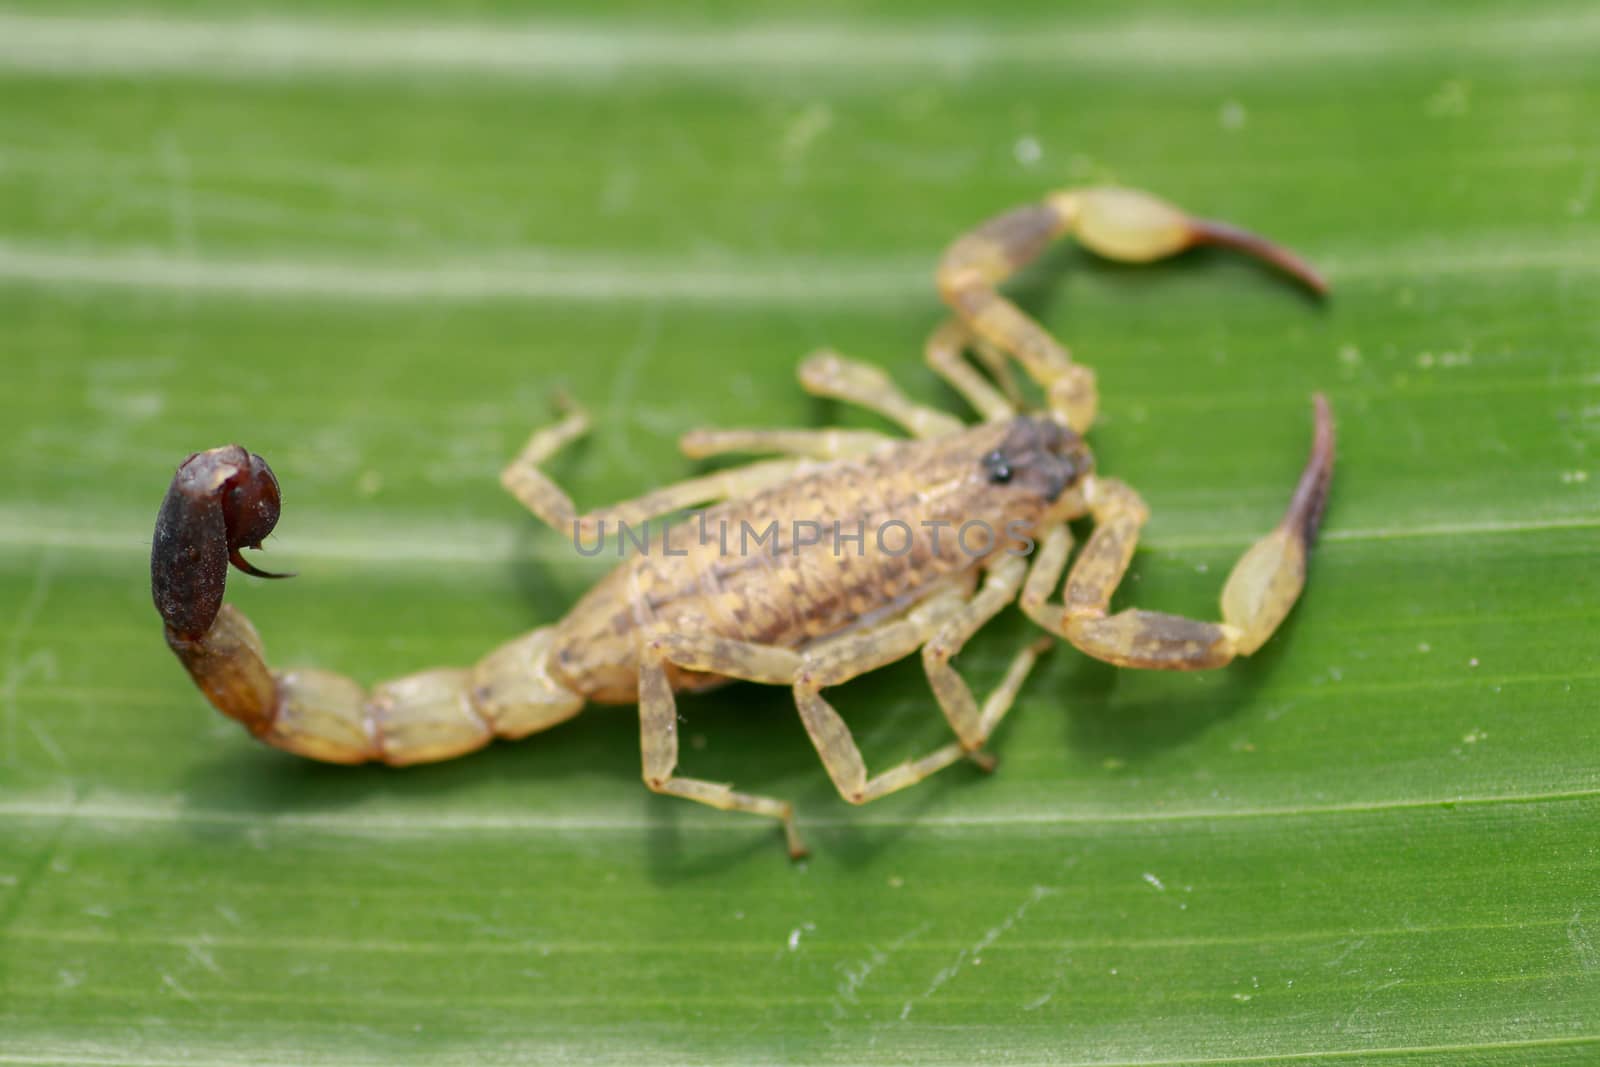 Top view of Deathstalker on green leaf in nature. Leiurus quinquestriatus is a species of scorpion, a member of the Buthidae family. It is also known as the Israeli yellow scorpion Omdurman scorpion.